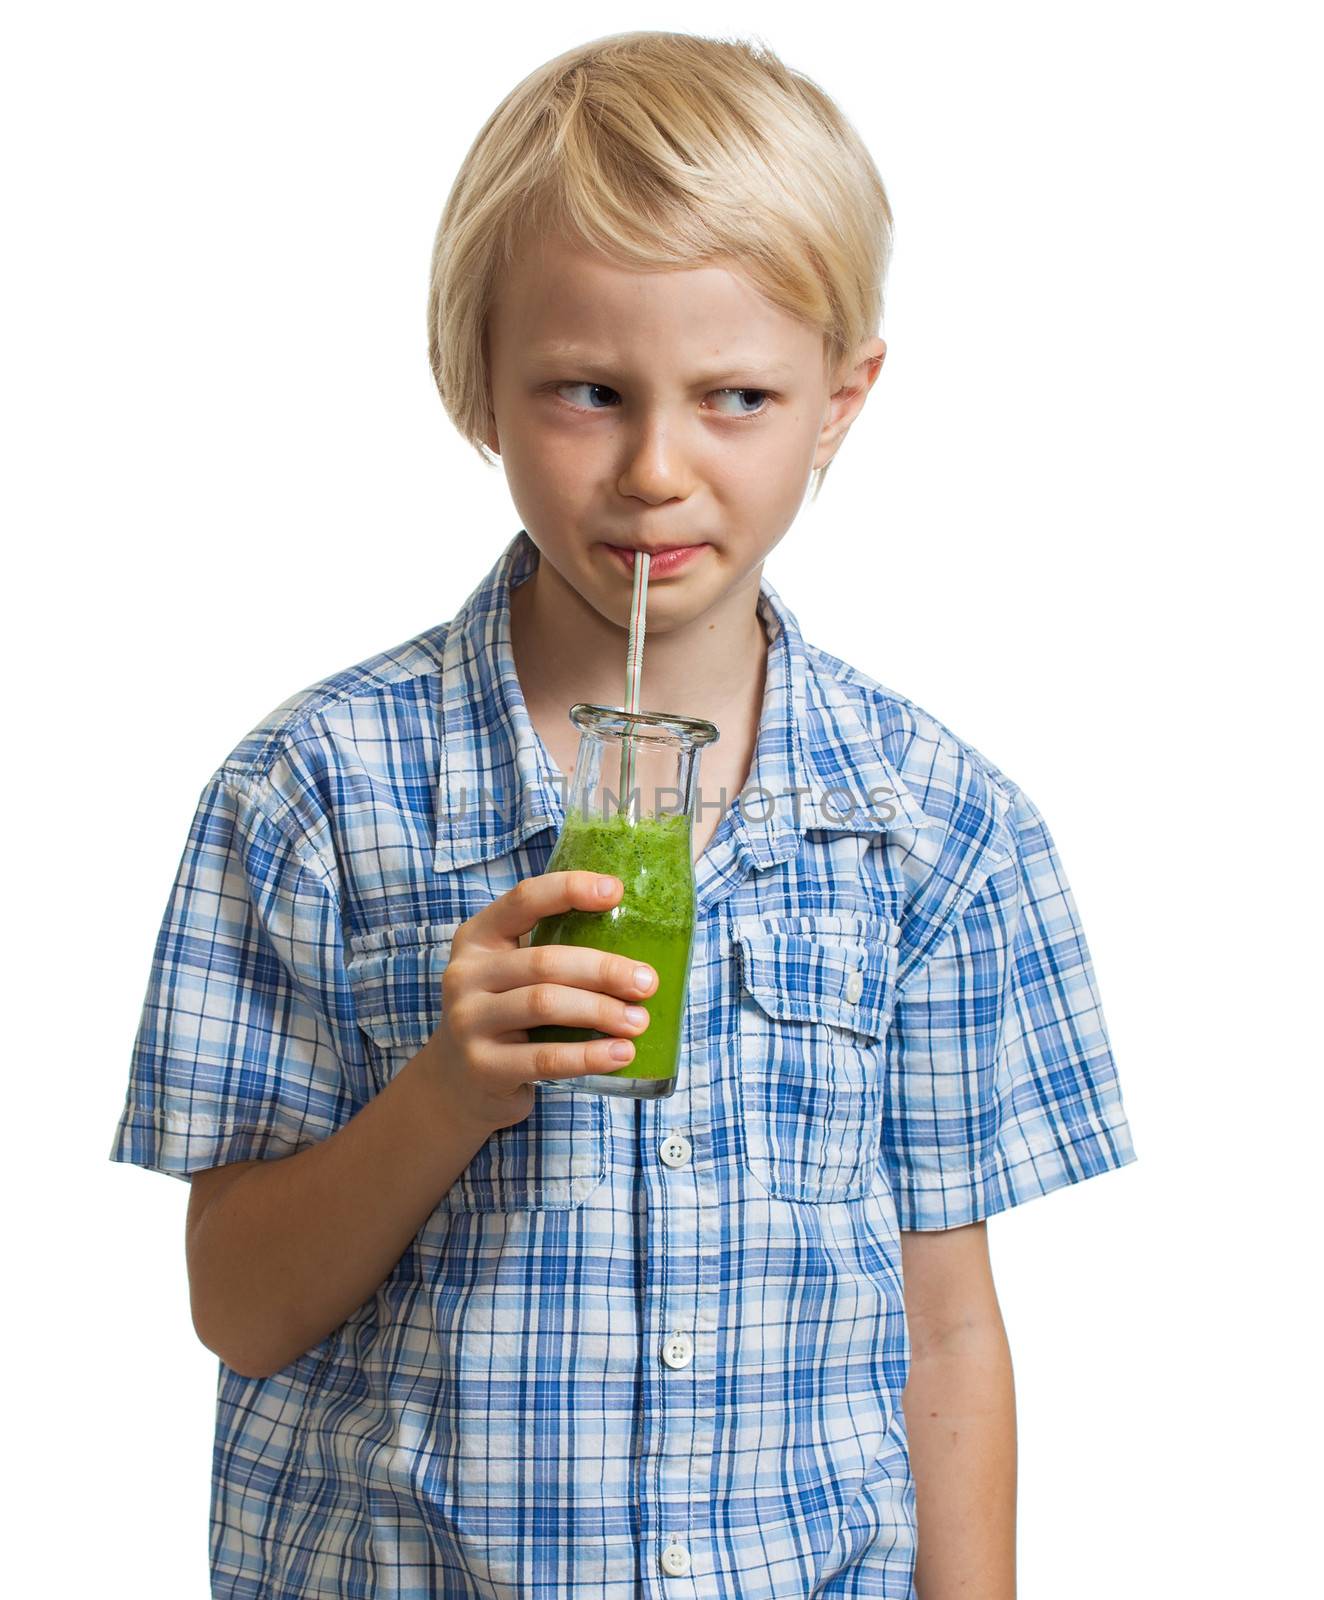 A cute boy, looking suspicious while drinking a green smoothie. Isolated on white.